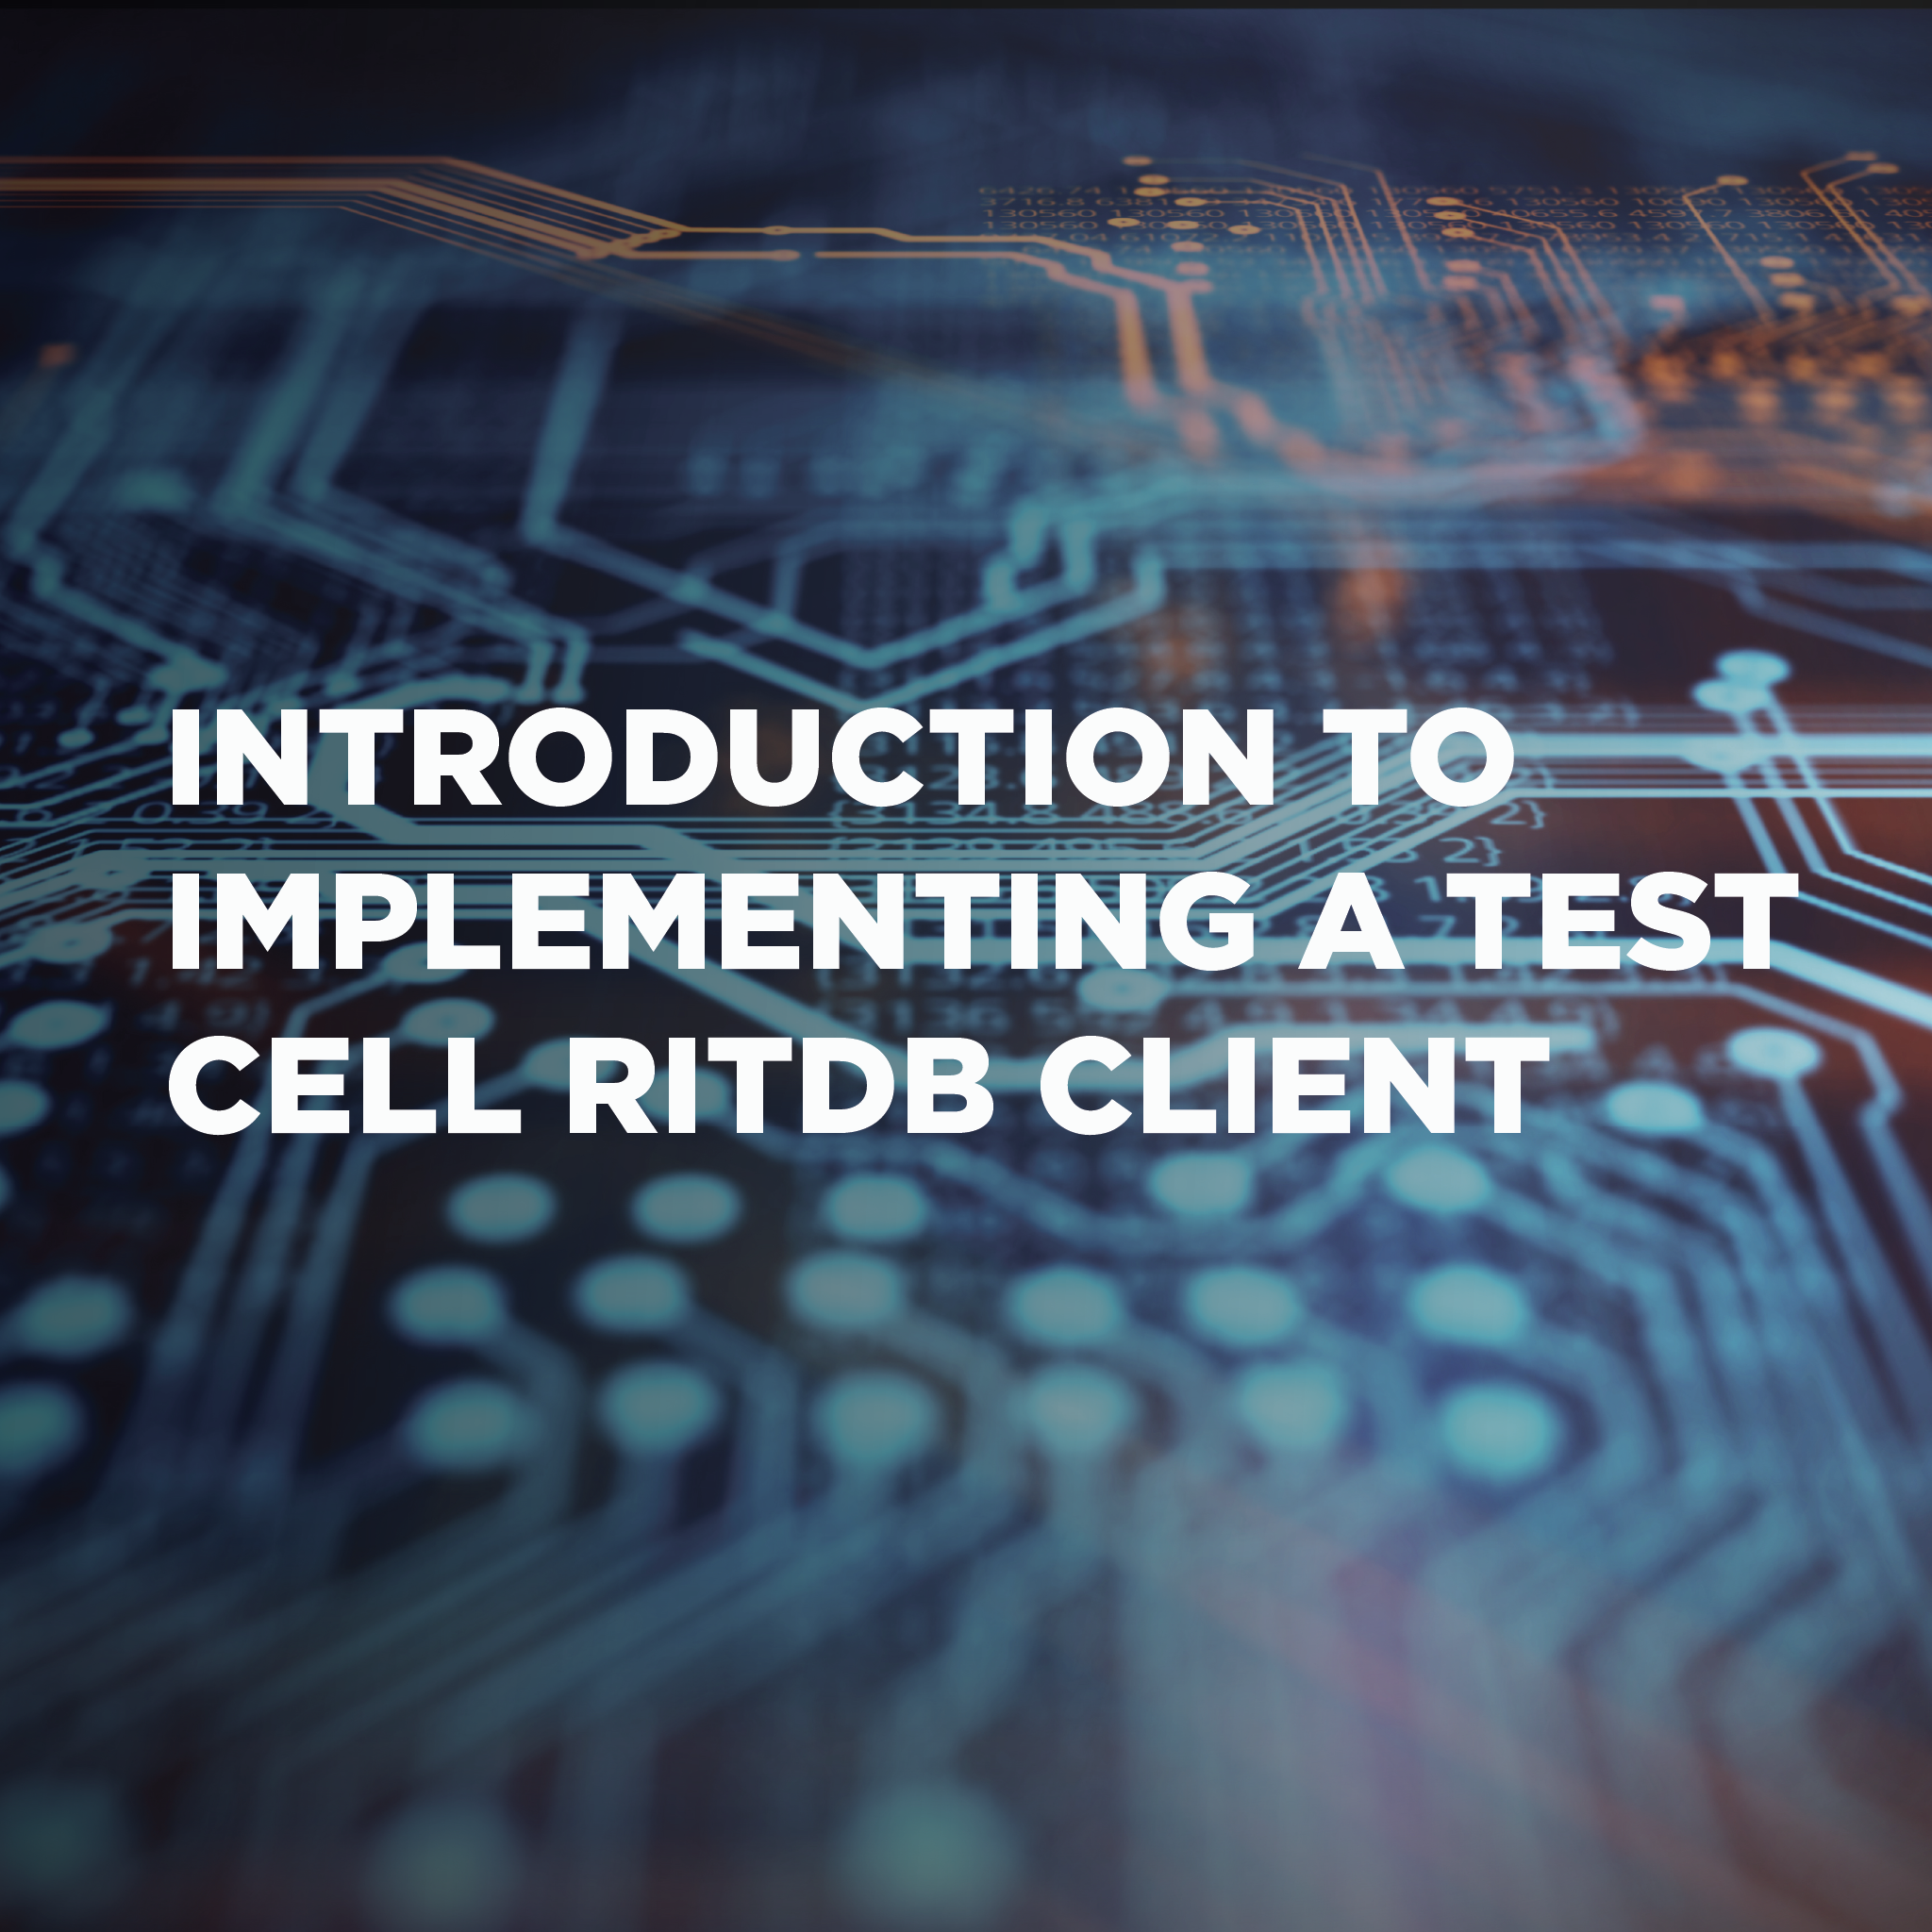 SEMI002 Introduction to Implementing a Test Cell RITdb Client